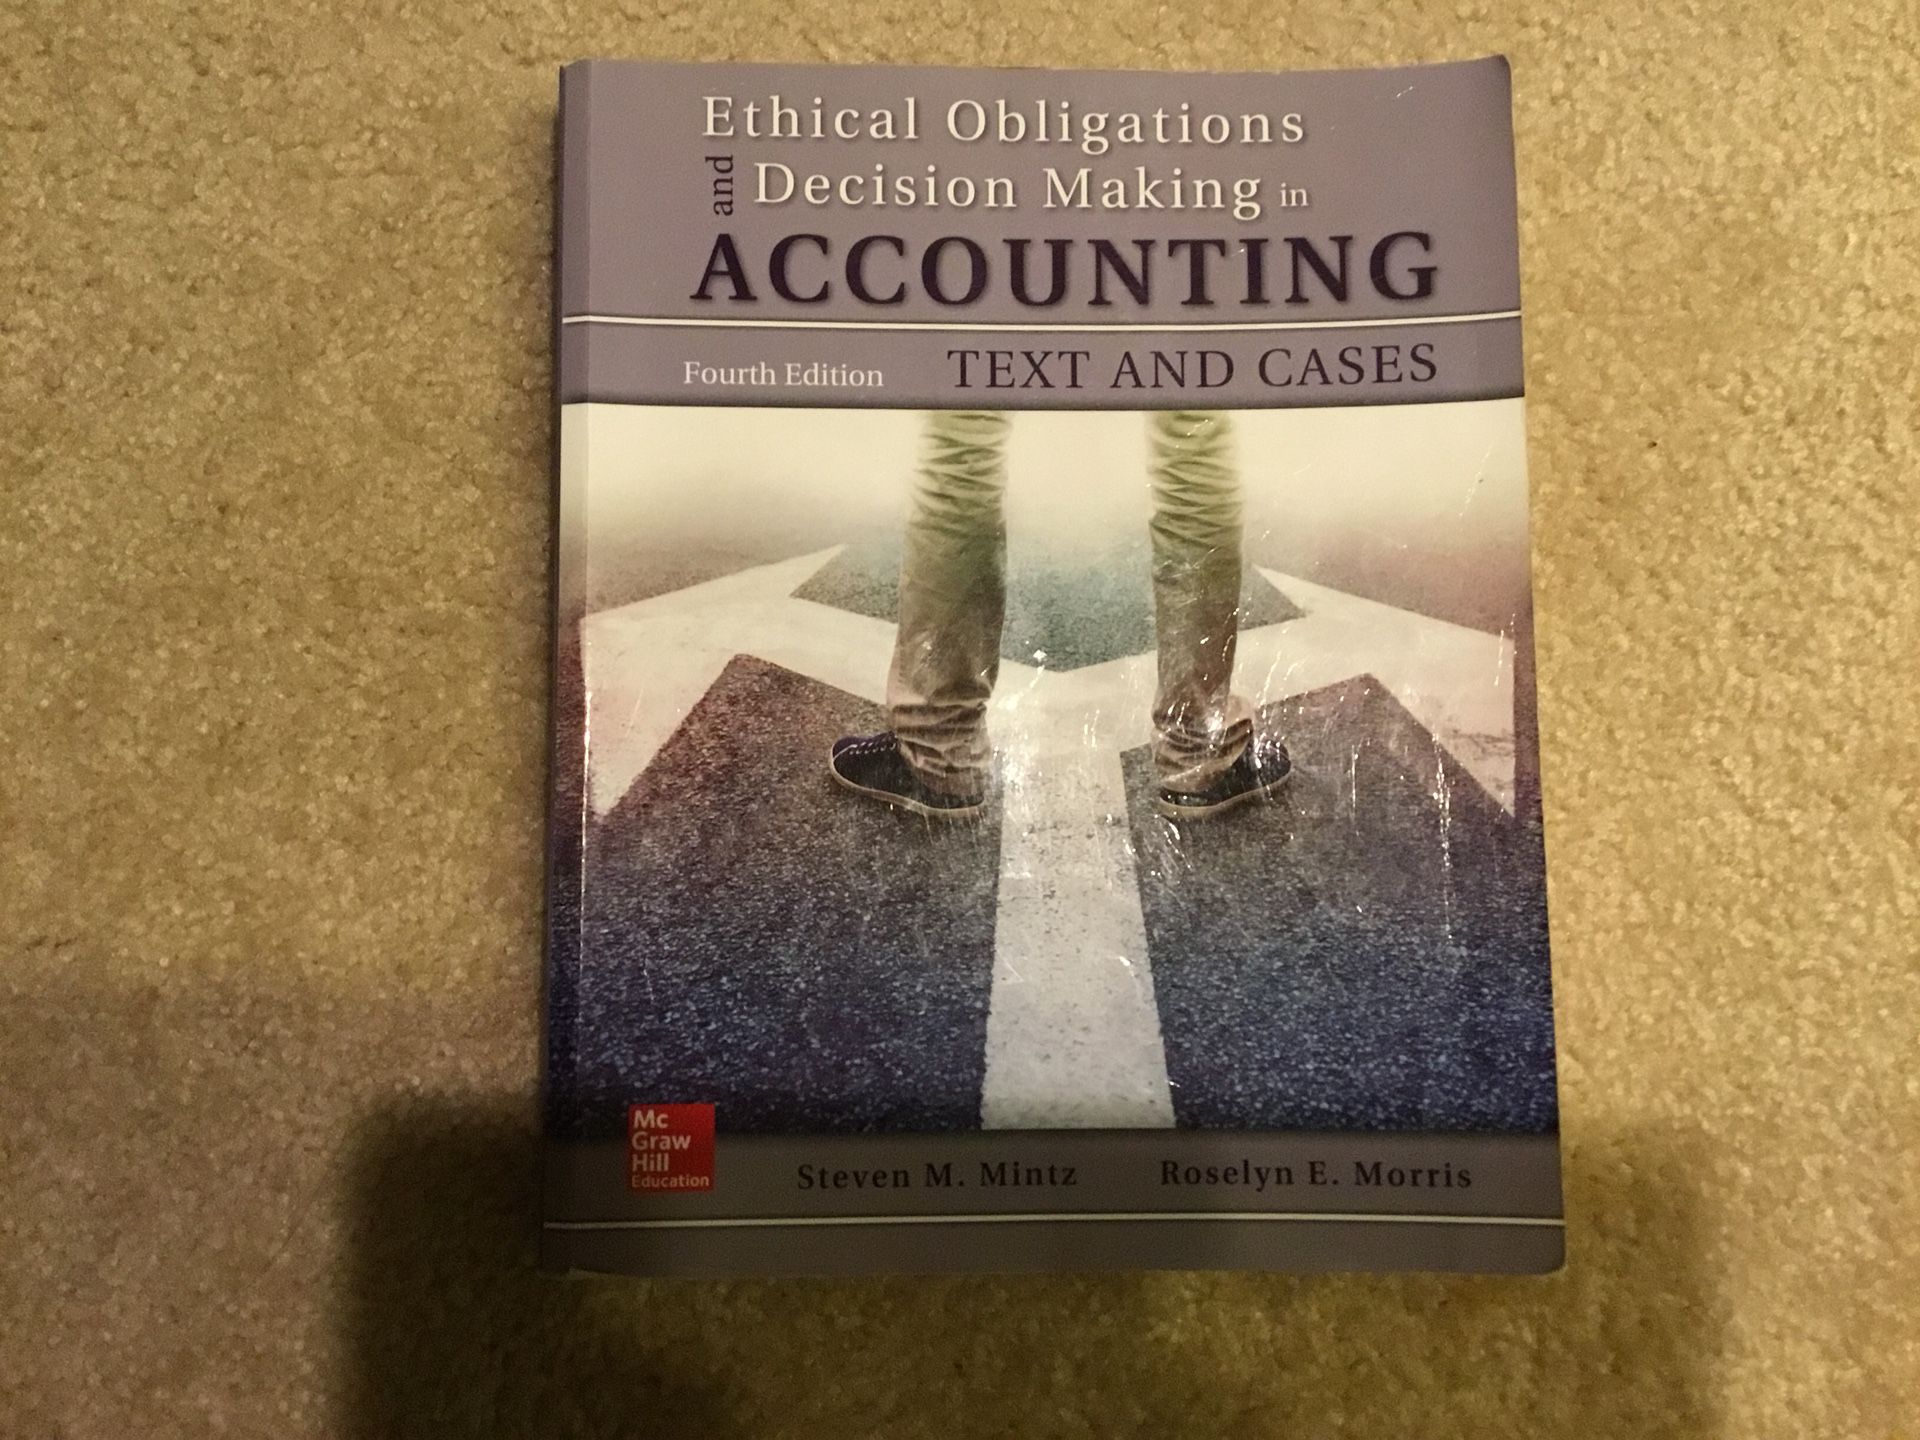 Ethical obligations and Decision making in ACCOUNTING, 4th edition